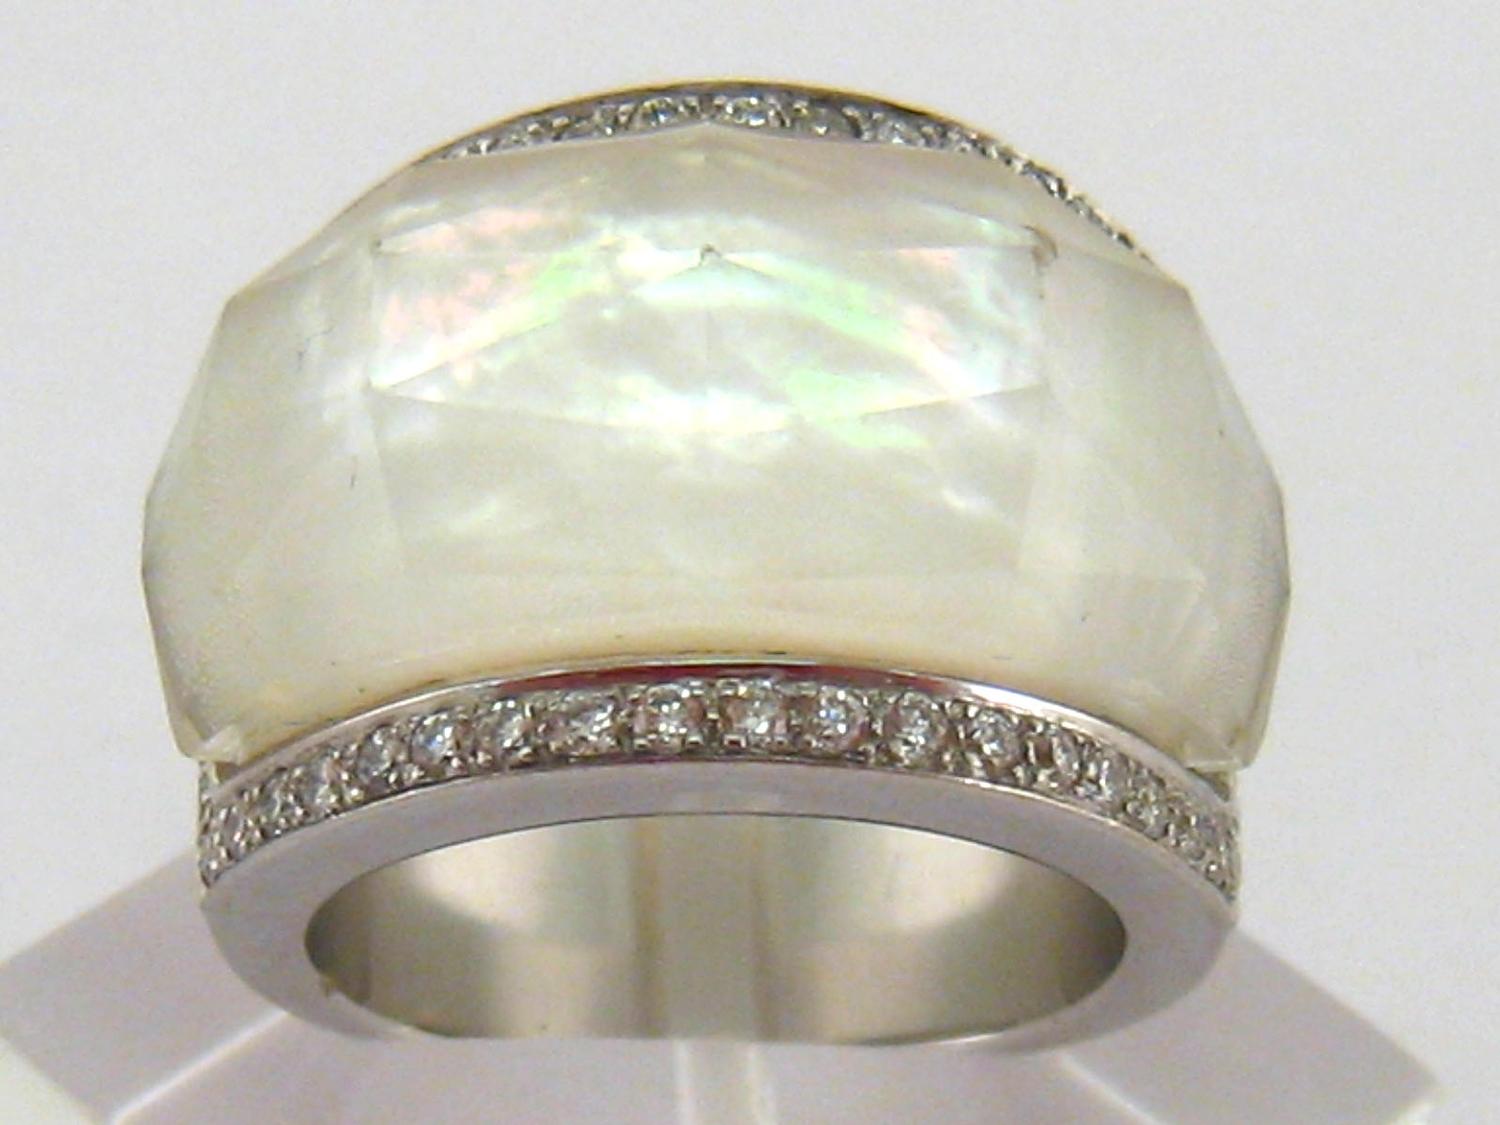 A diamond and mother of pearl dress ring, the large facetted crystal bezel overlaying the mother-